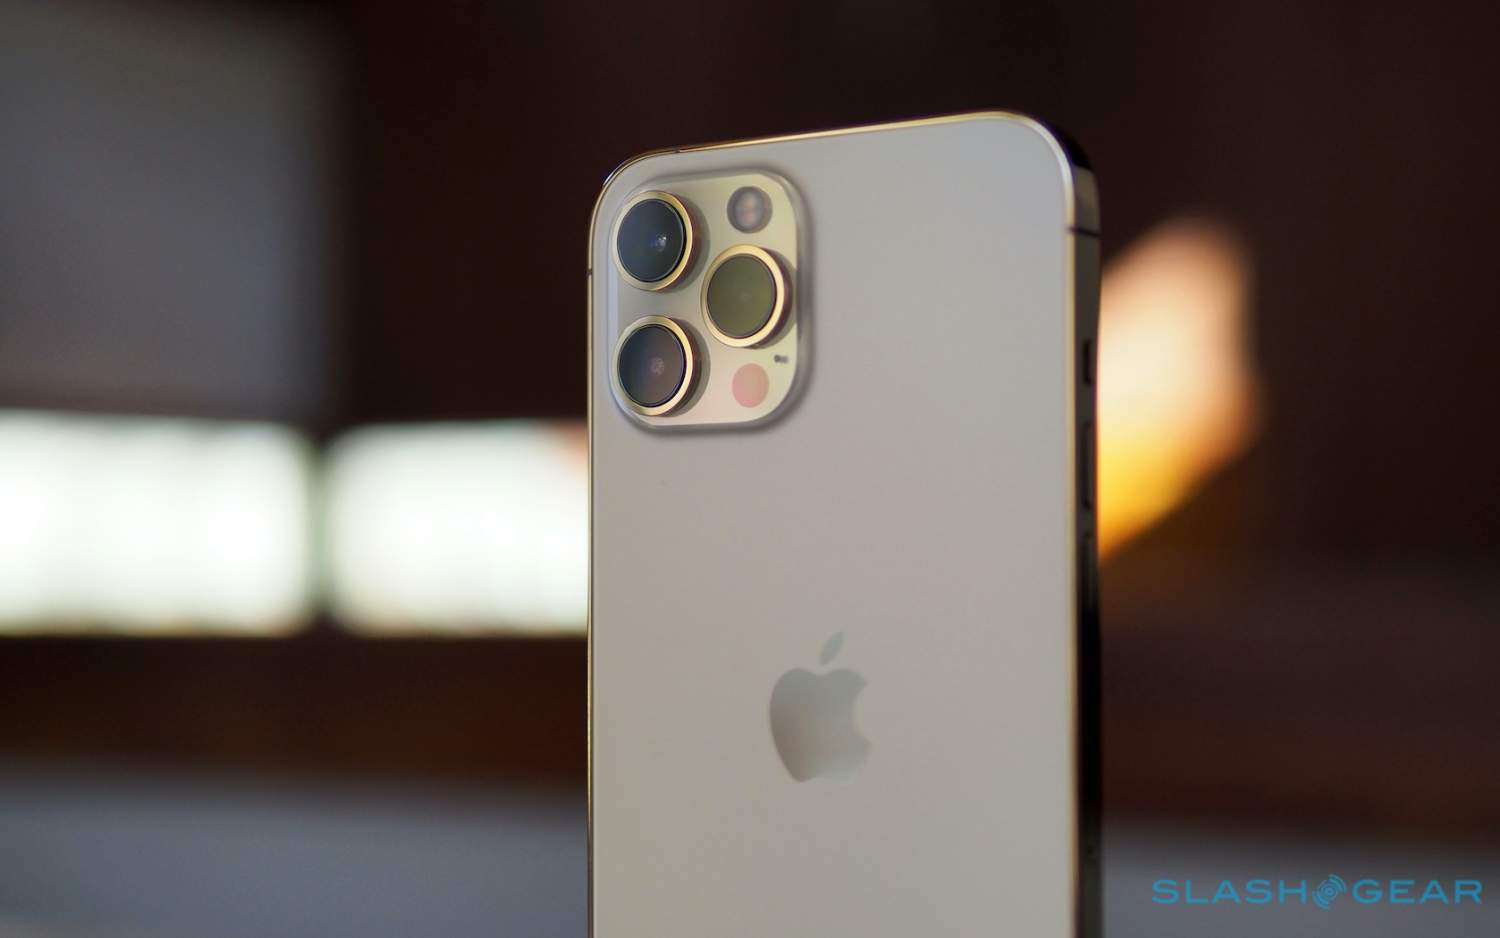 The iPhone 13 Pro ultra-wide camera could get a long overdue upgrade